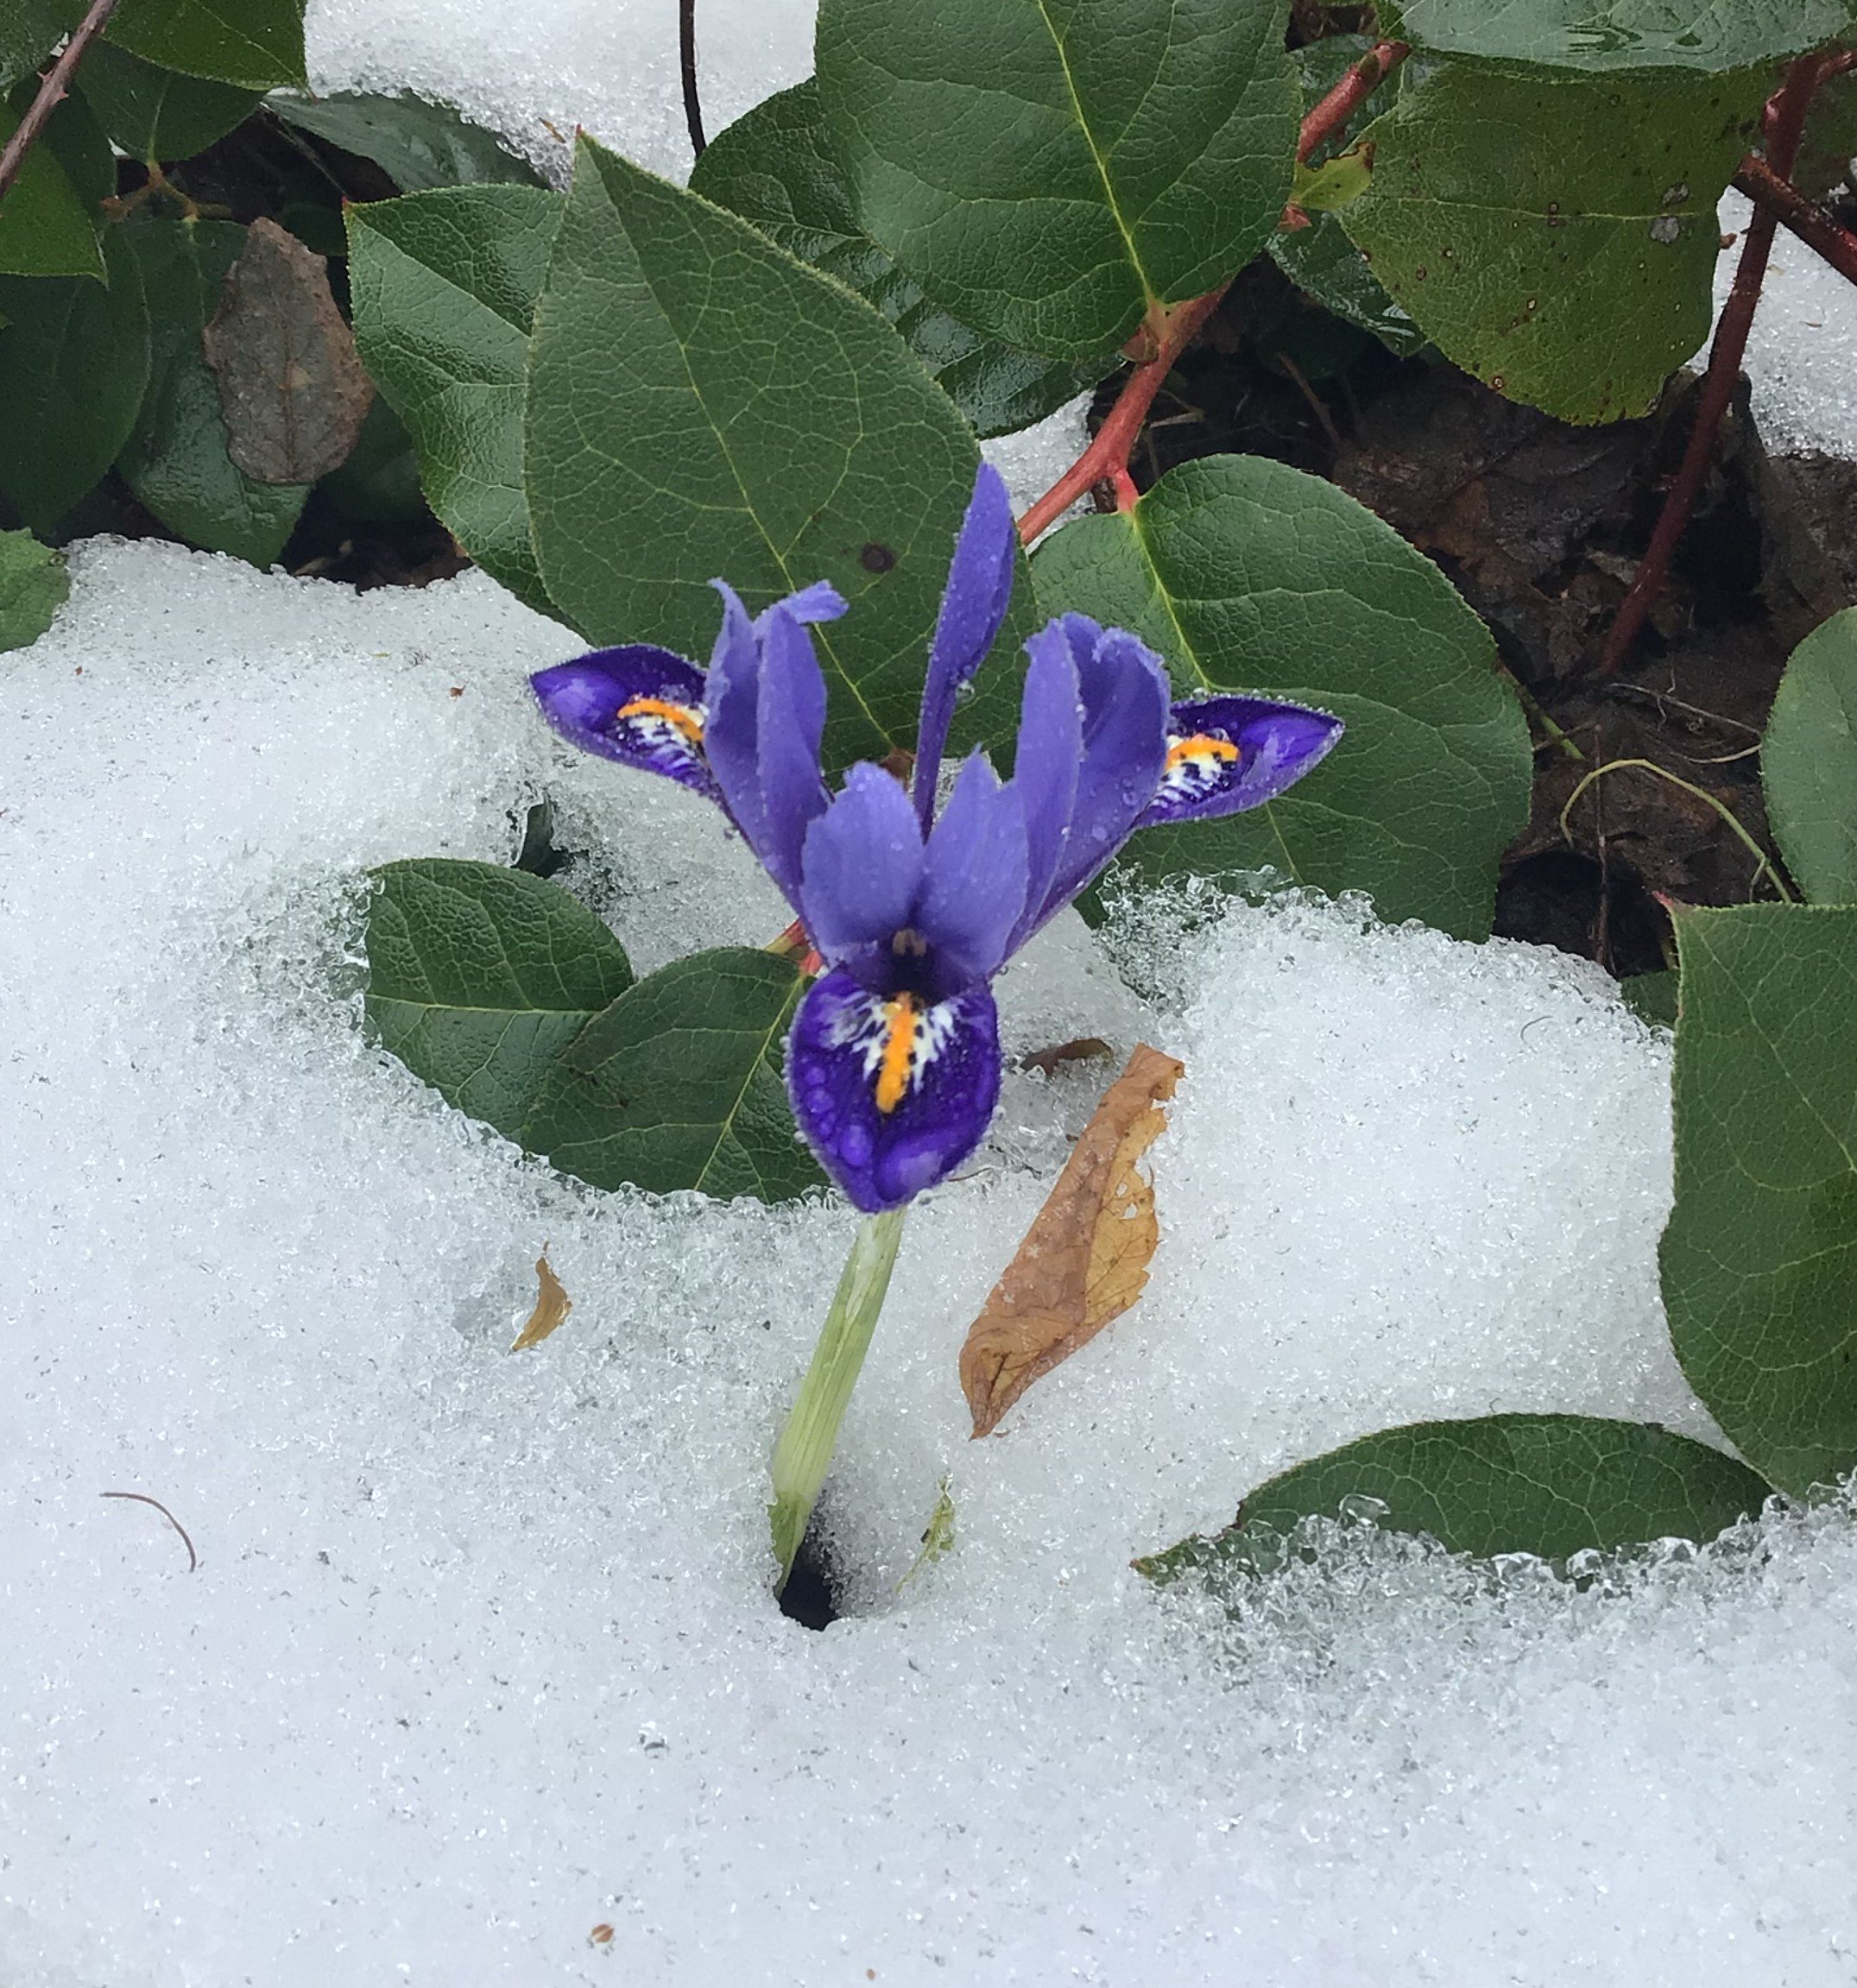 One tiny purple iris poking out through the crusty snow cover